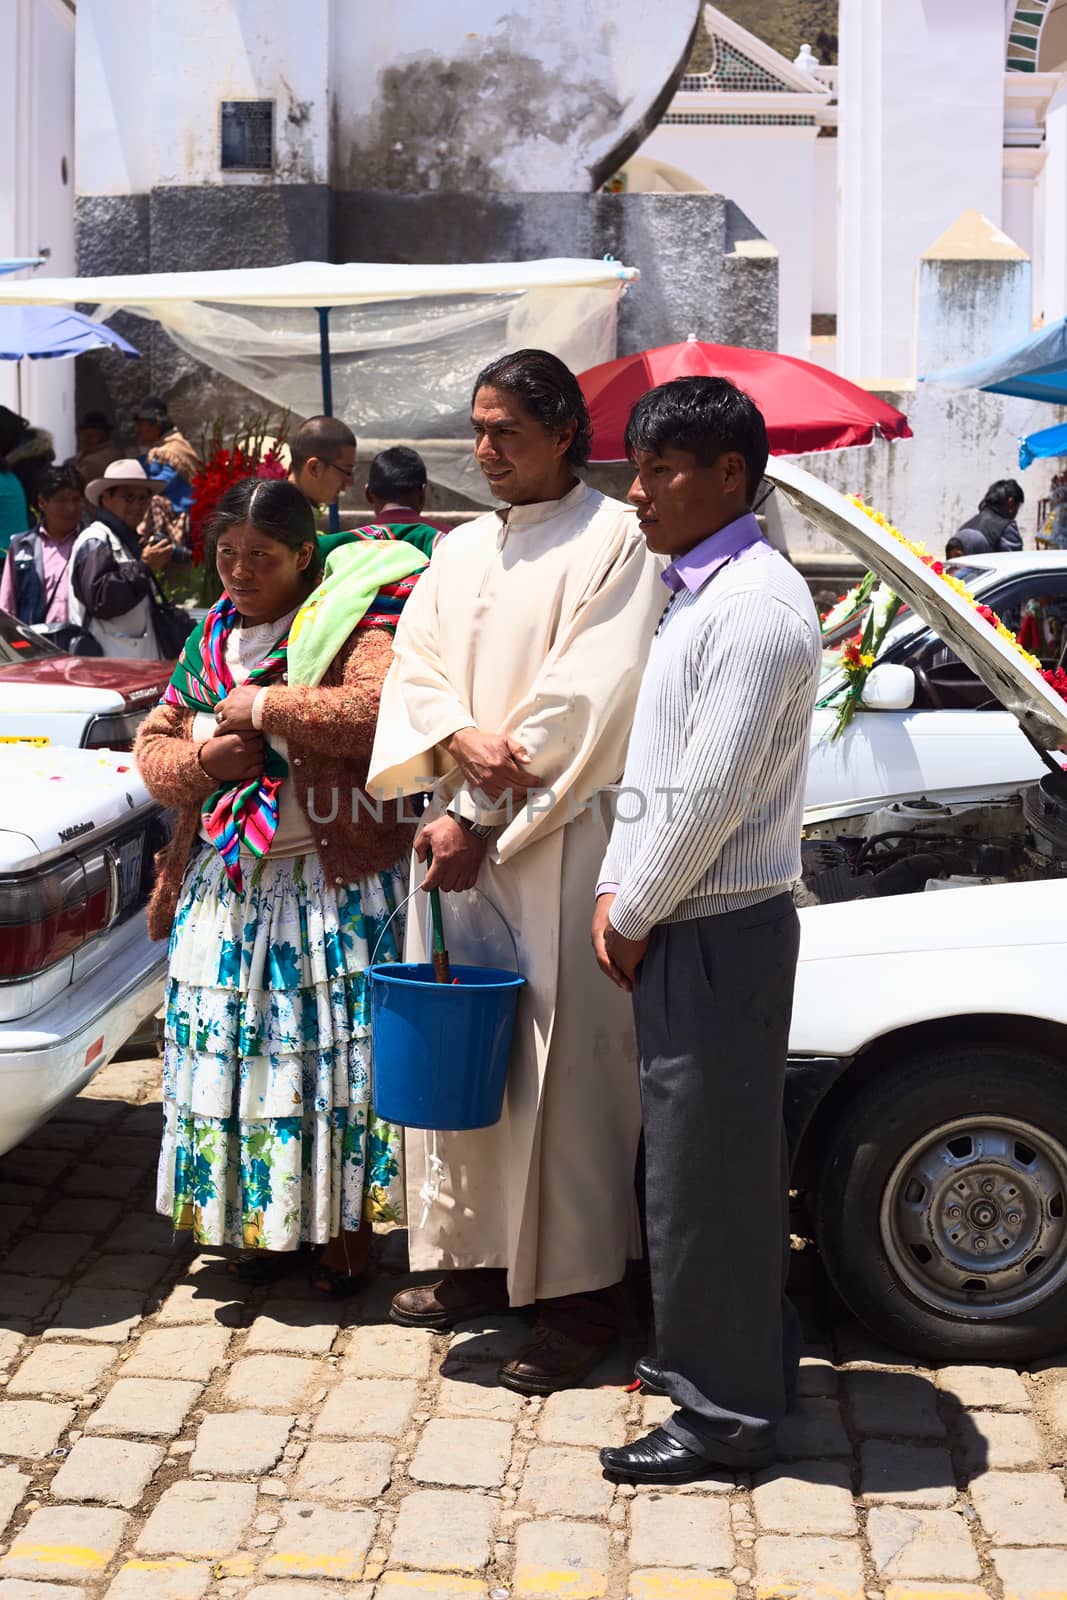 COPACABANA, BOLIVIA - OCTOBER 20, 2014: Unidentified priest with owners of a car posing for a photograph at the blessing of vehicles in front of the basilica on 6 de Agosto avenue in the center on October 20, 2014 in Copacabana, Bolivia. The blessing of automobiles takes place daily and is a ritual attended by many.